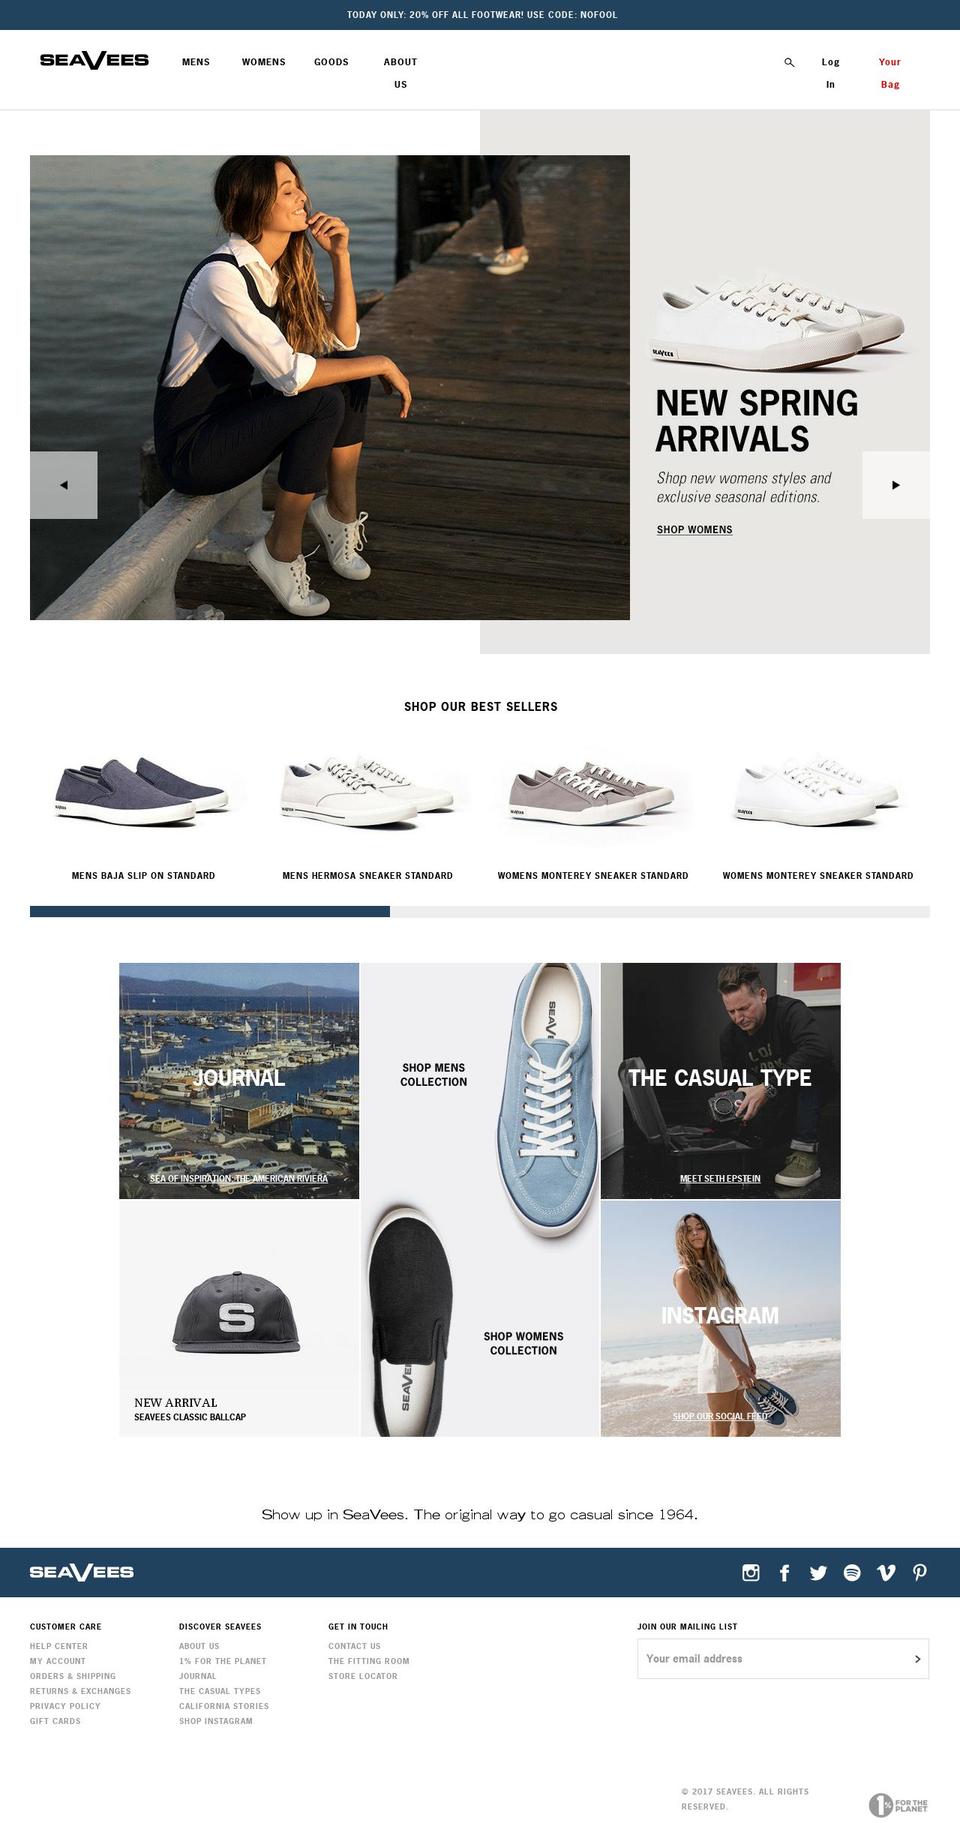 Production Shopify theme site example seavees.com